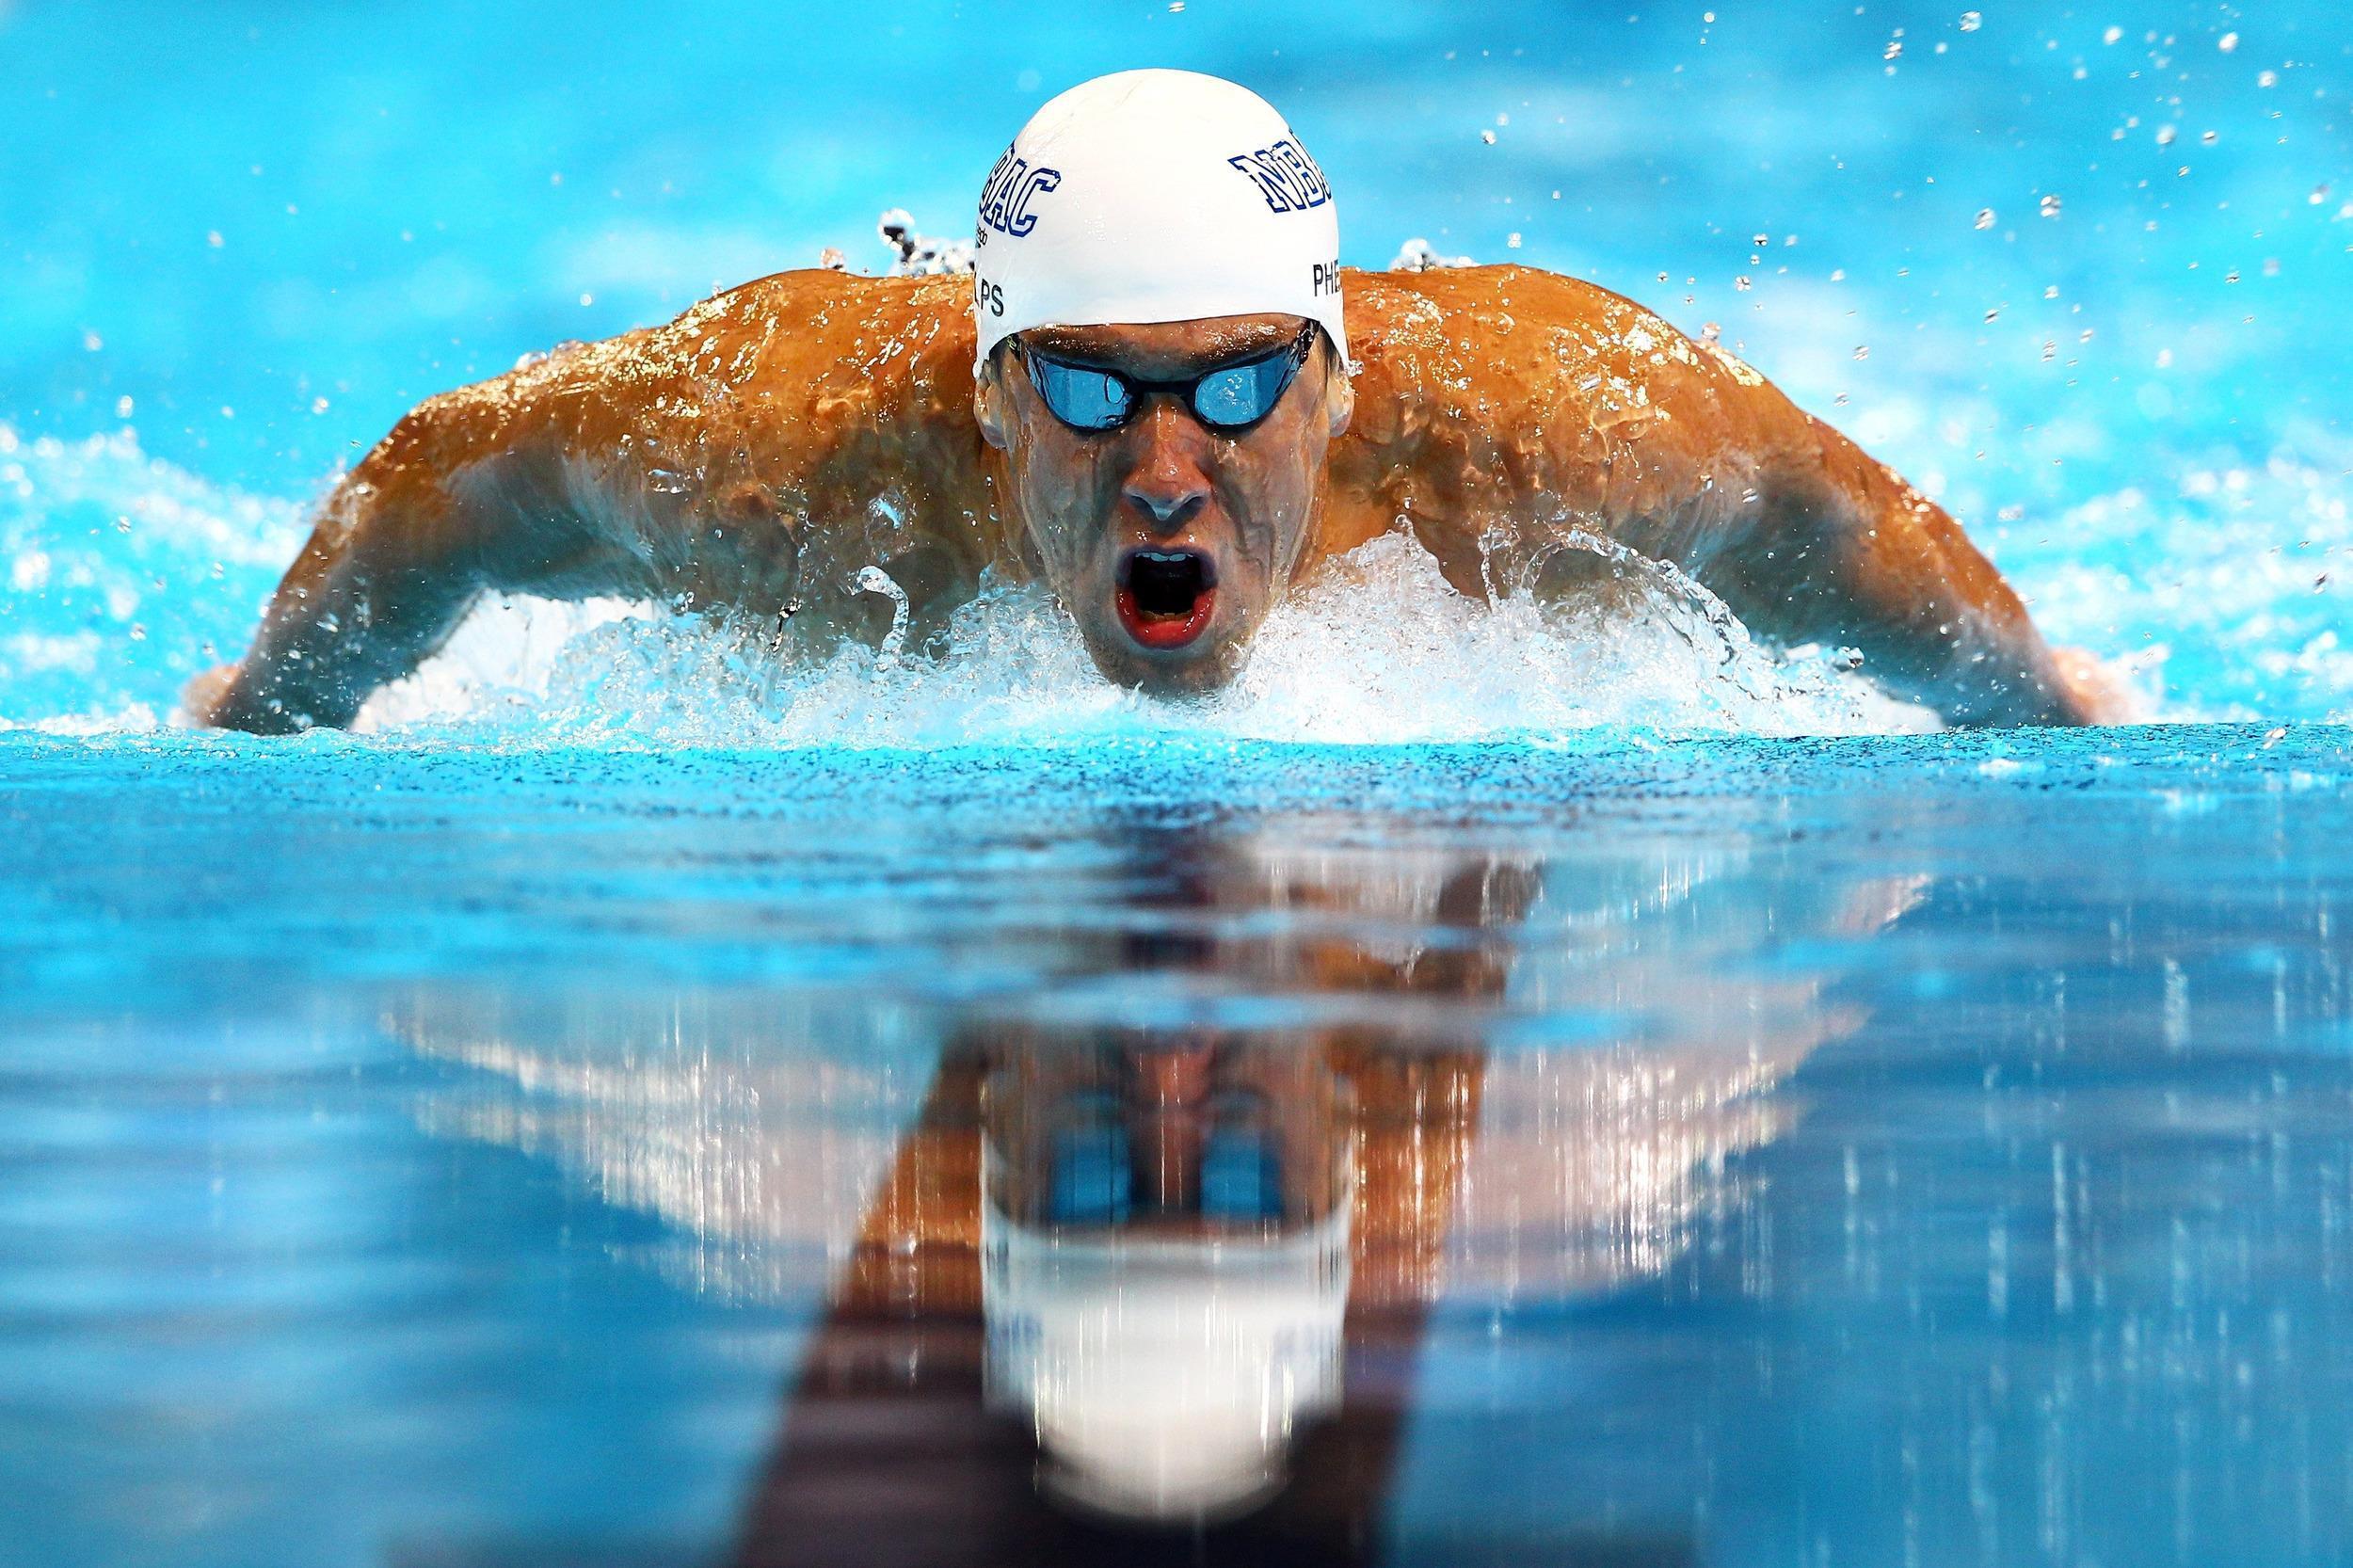 Michael Phelps Wallpapers Image Photos Pictures Backgrounds.